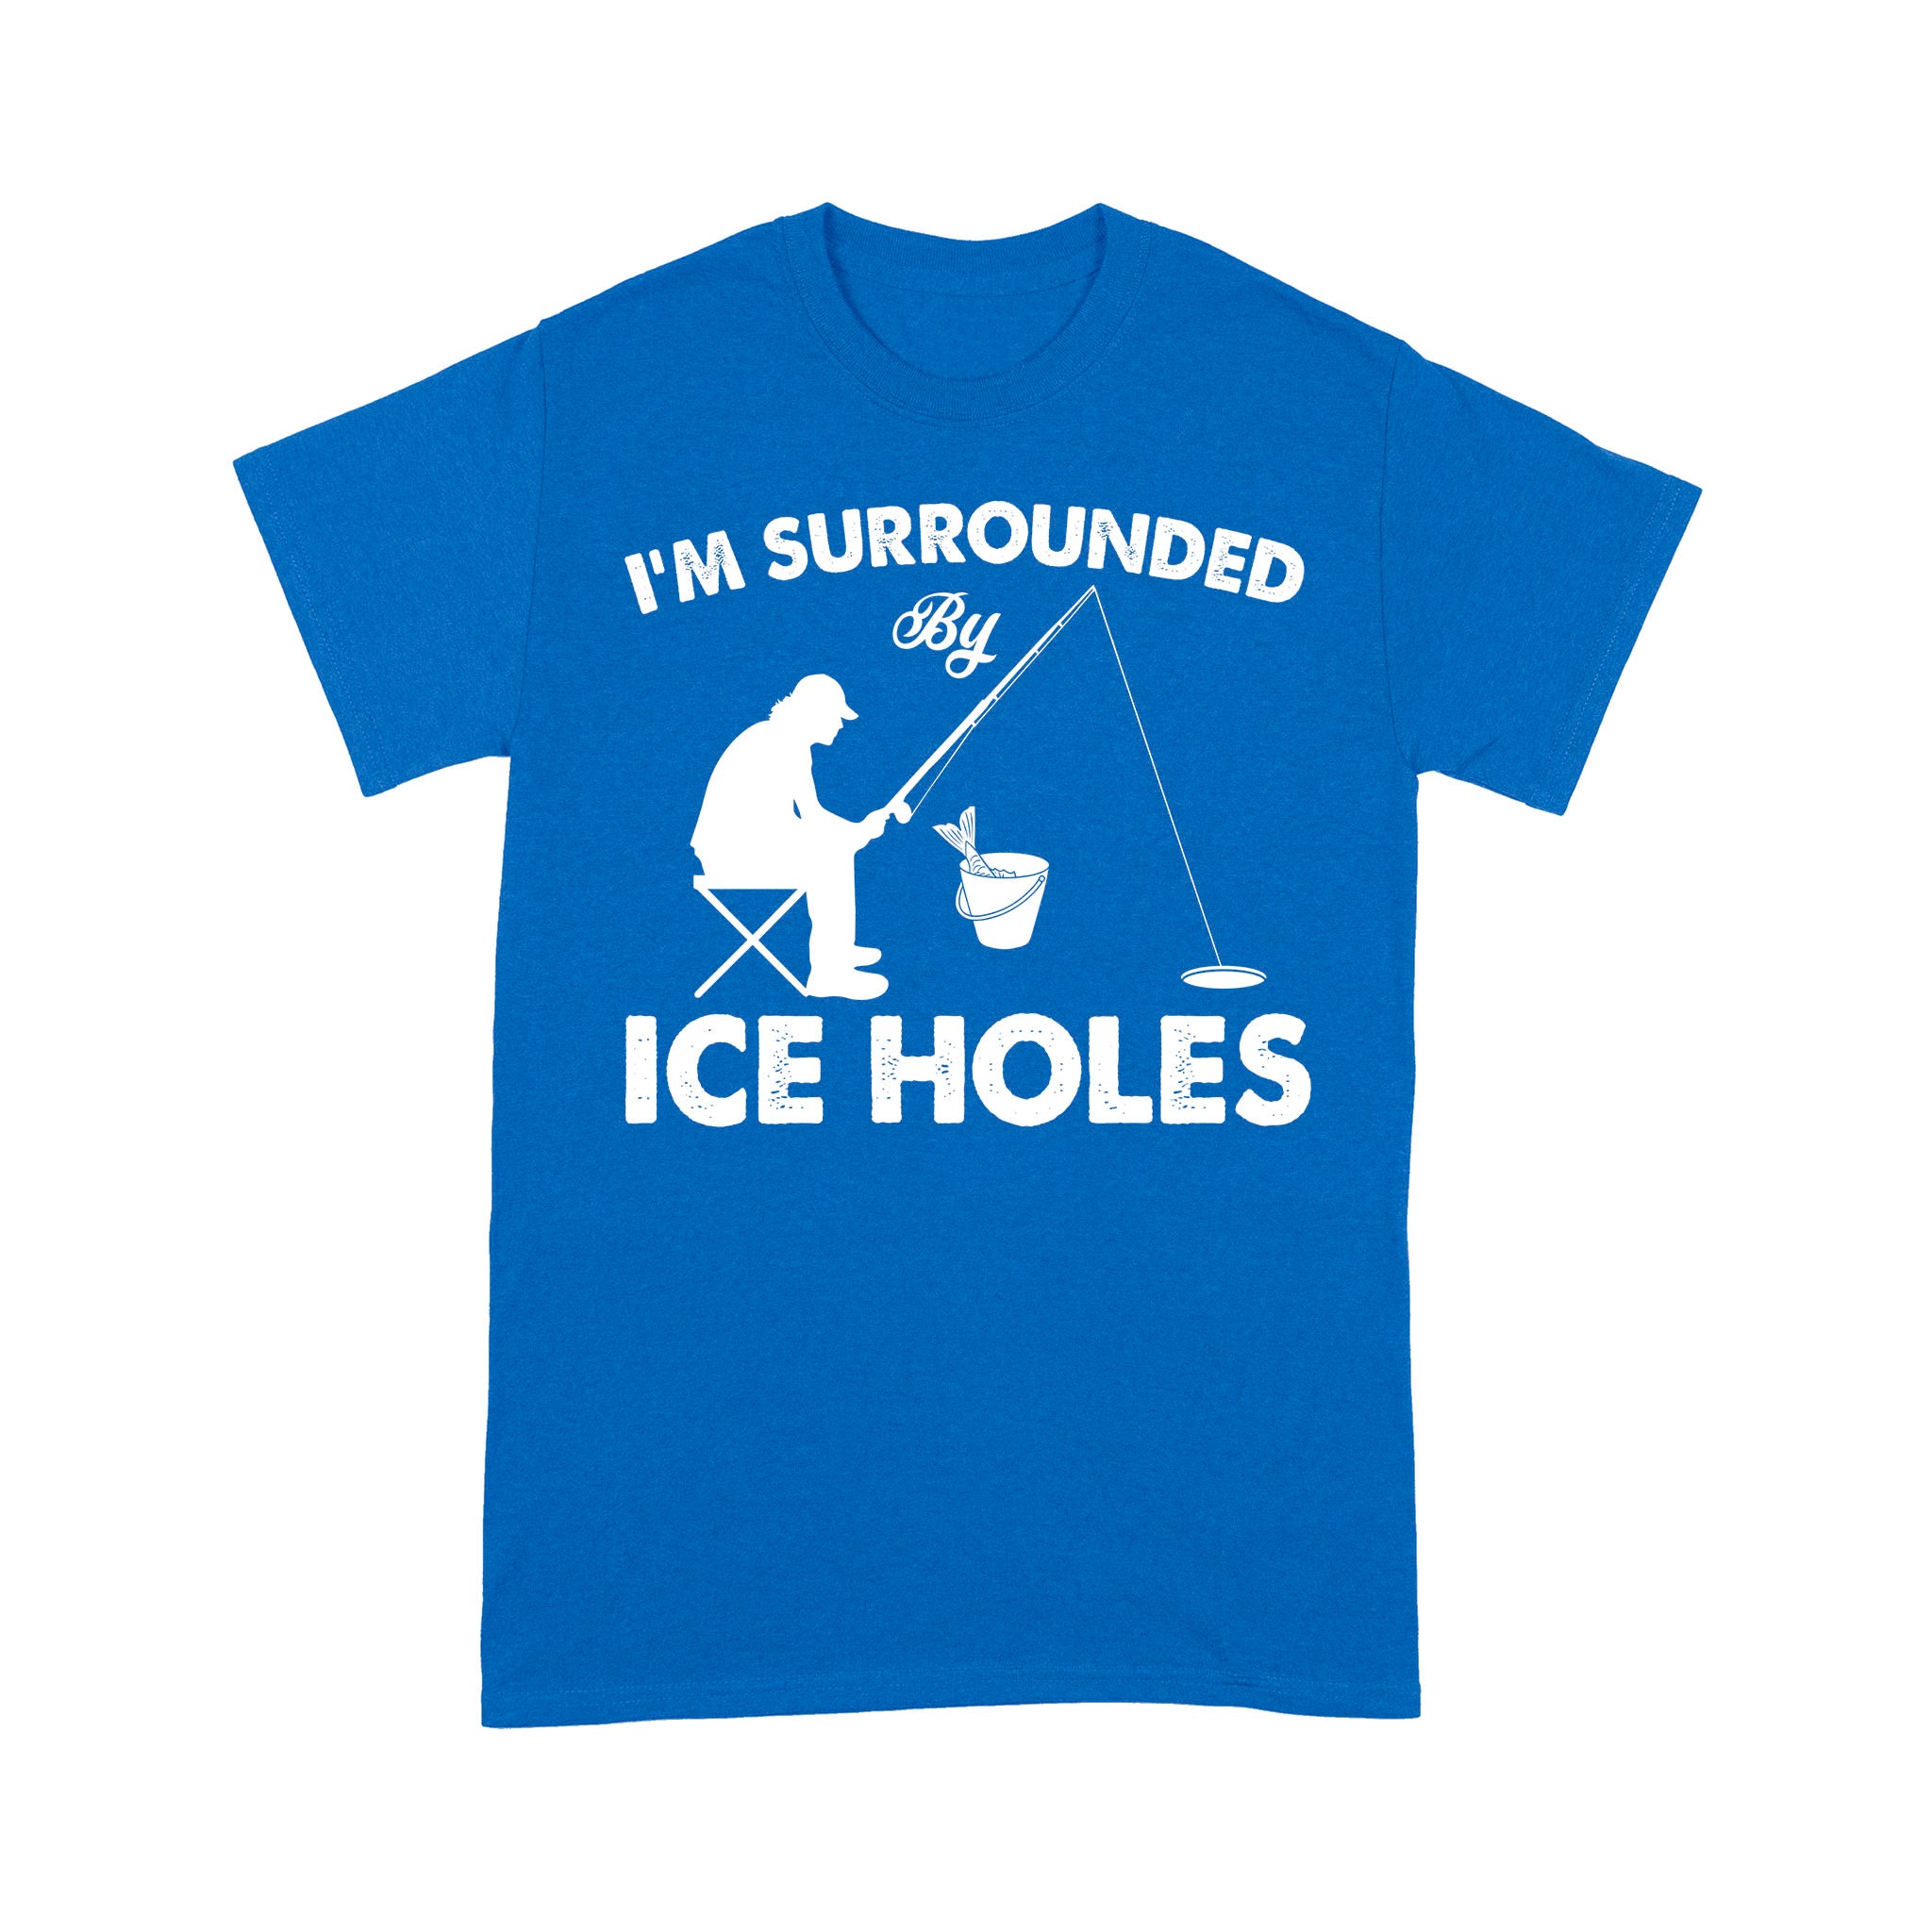 I'm surrounded by ice holes, funny ice fishing shirt D03 NPQ202